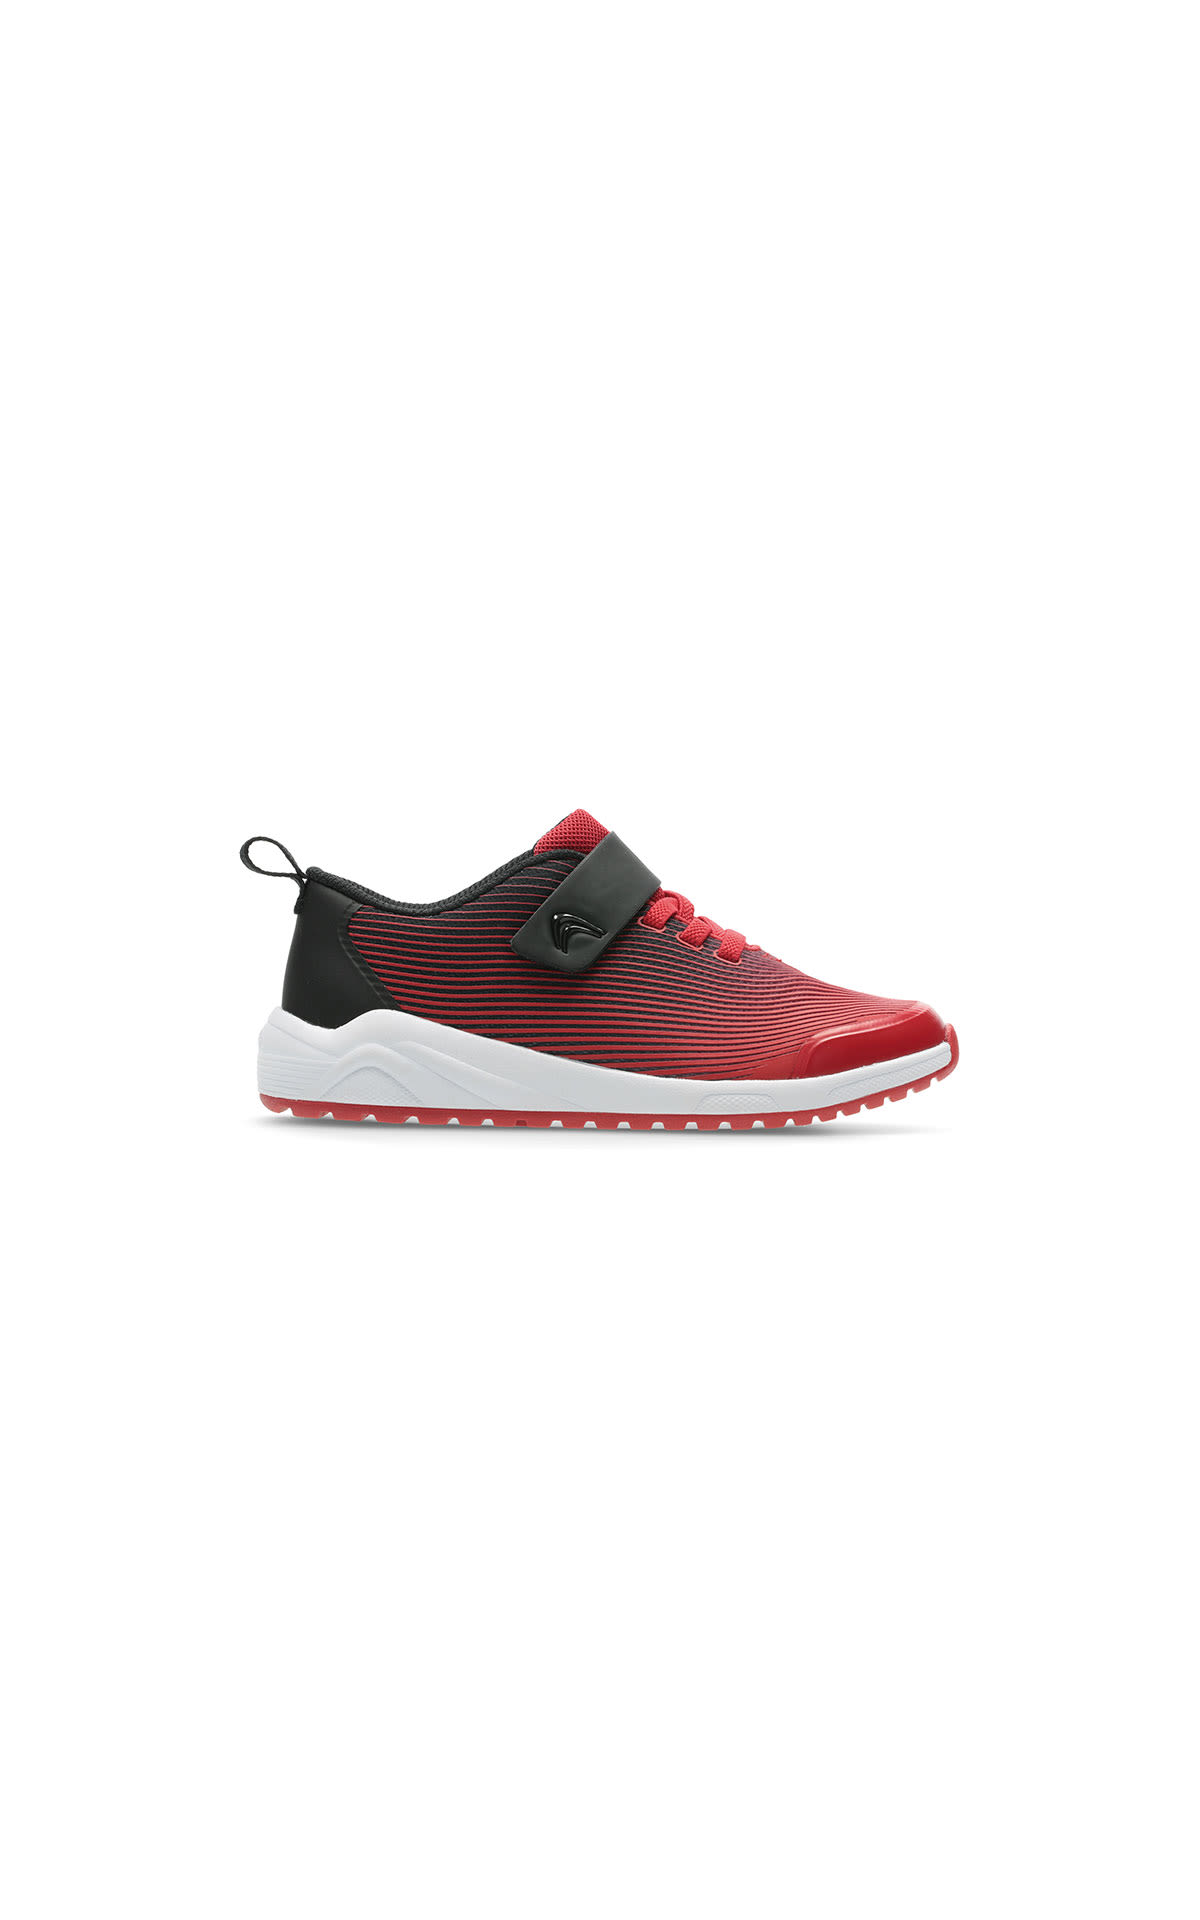 Clarks Aeon pace red from Bicester Village